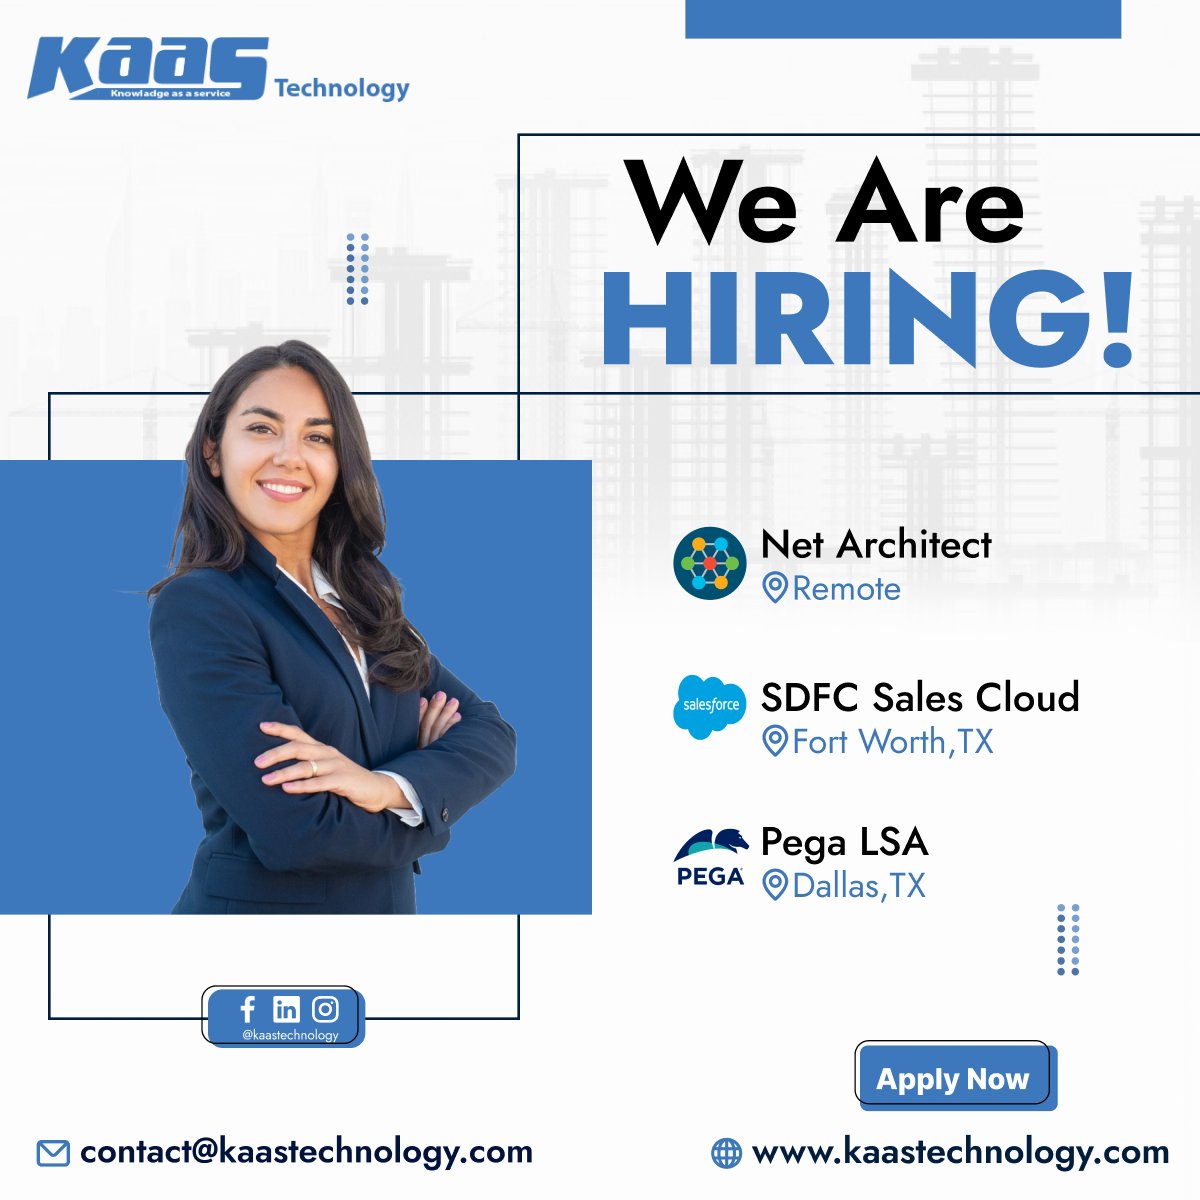 🚀 Ready to Make Your Mark in IT? Join KAAS Technology Today! 🌟

1️⃣Net Architects: Shape the digital landscape.
2️⃣SFDC Sales Cloud Experts: Drive sales transformation.
3️⃣Pega LSAs: Lead the charge in business innovation.

#JobsInTech  #KAASTechnology #employmentagencysingapore